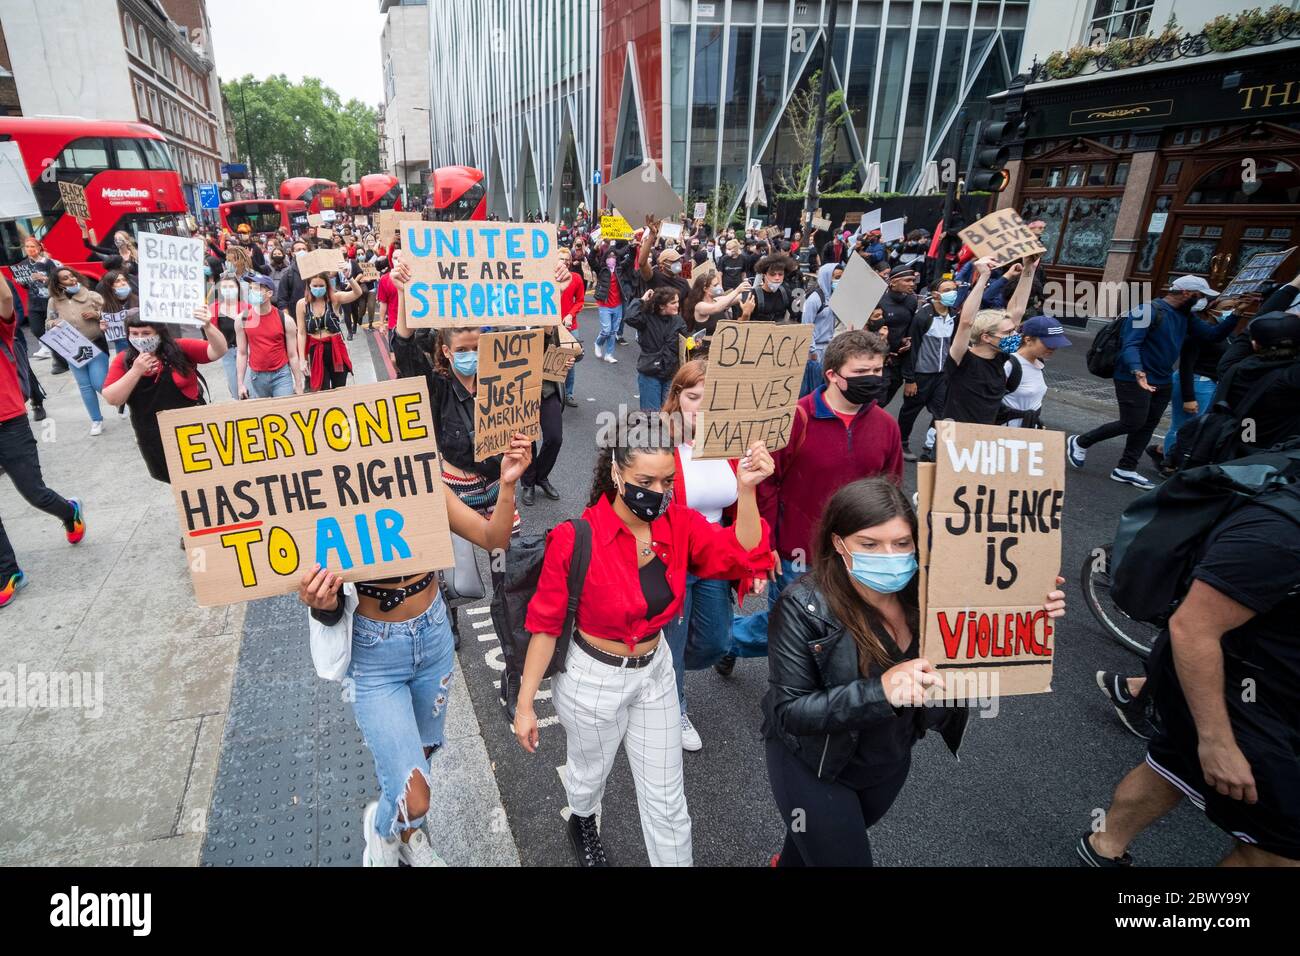 London, UK: June 3, 2020: Black Lives Matter protesters with signs walking from Westminster past Victoria Station Stock Photo